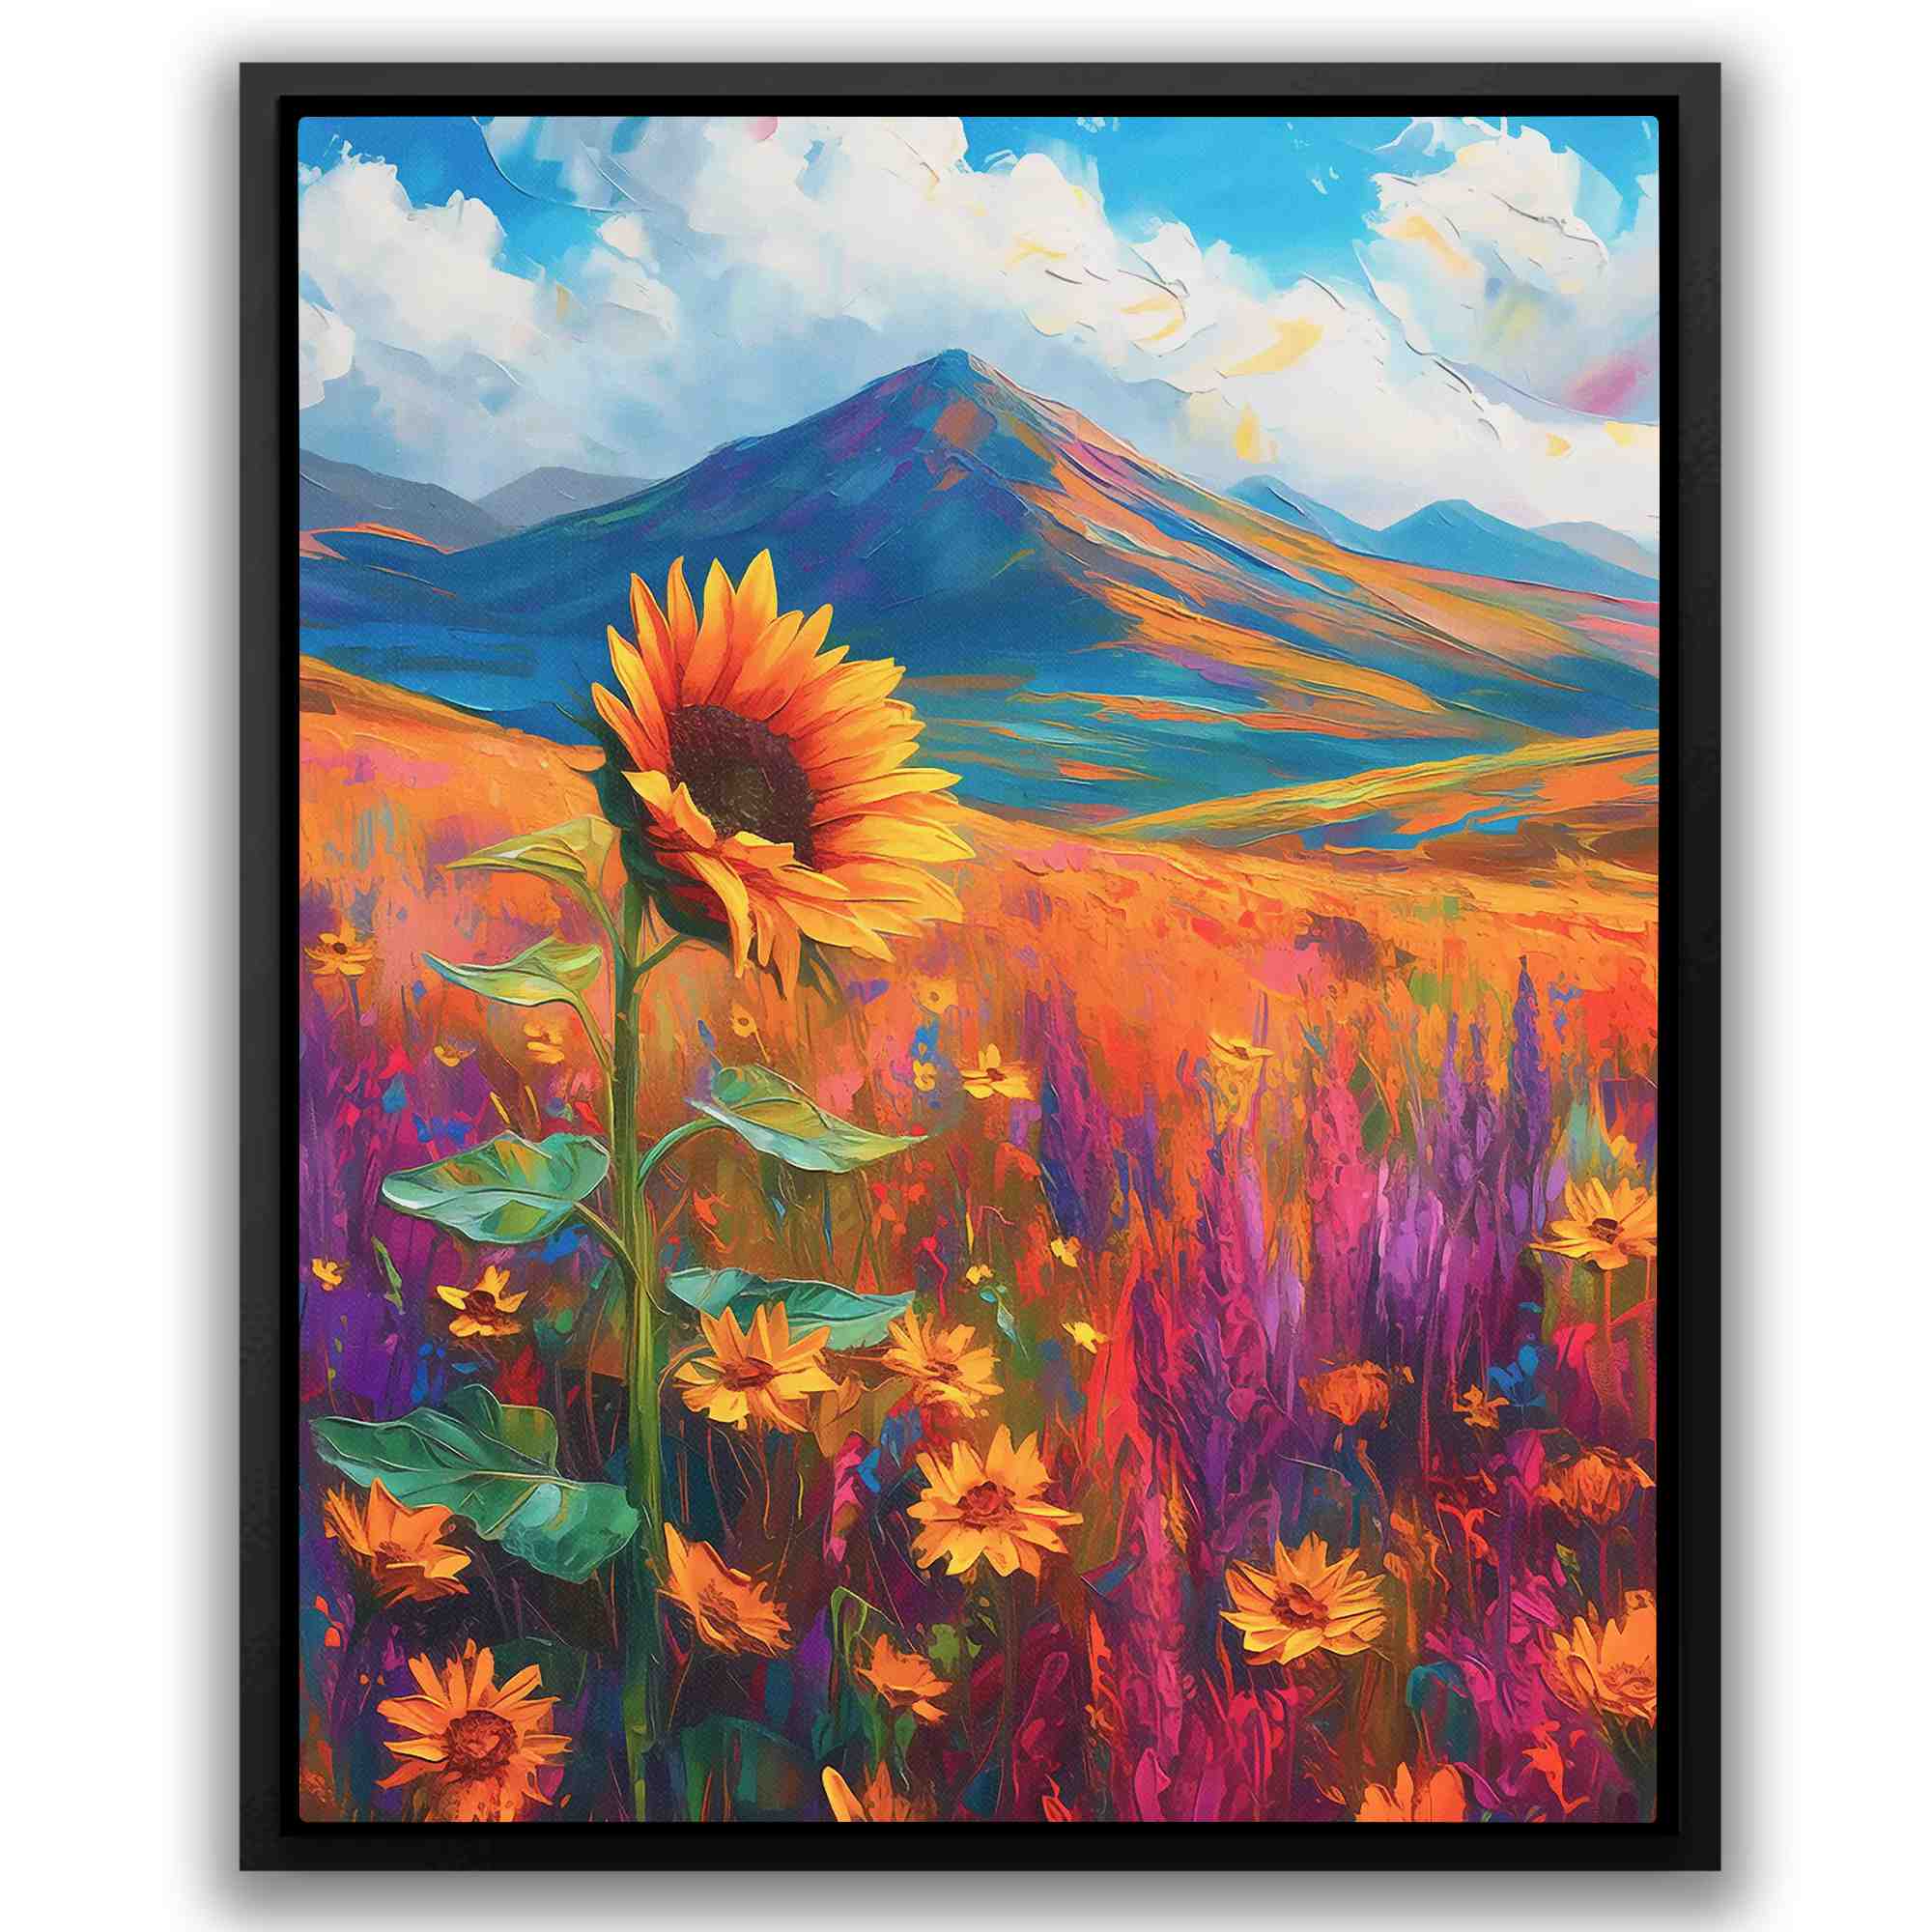 a painting of a sunflower in a field with mountains in the background